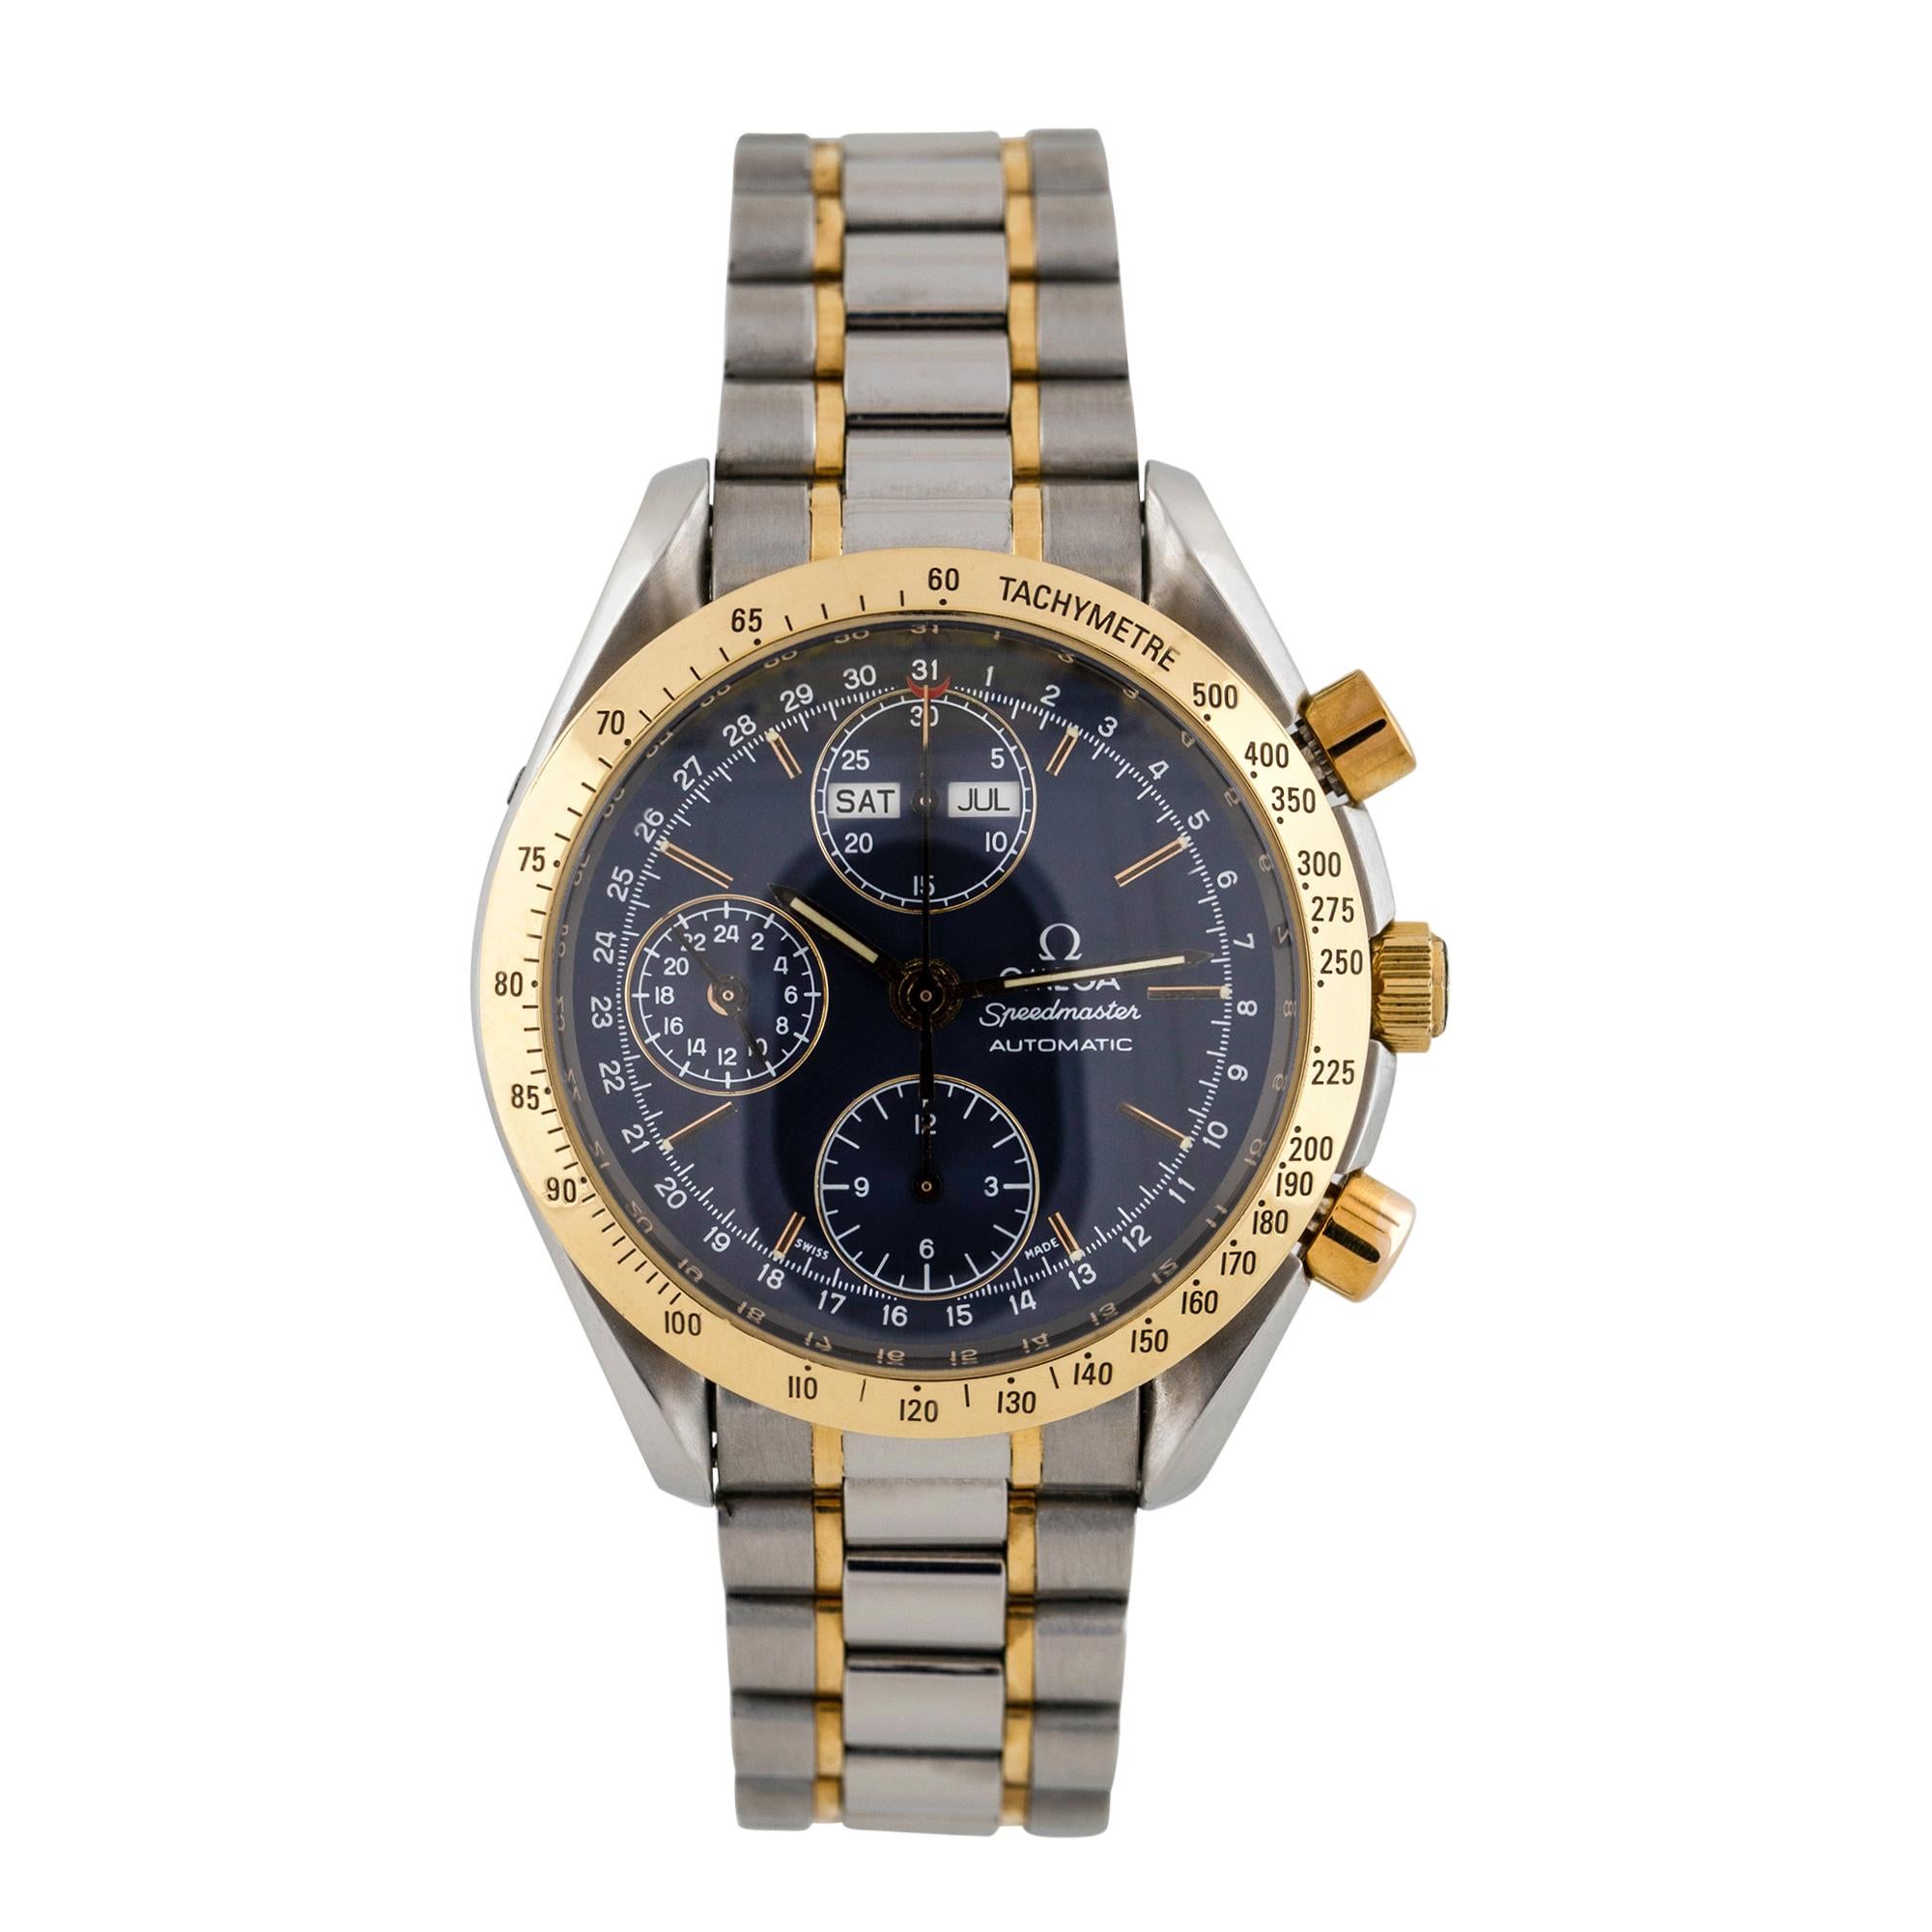 Brand: Omega
Model: Seamaster Day Date
Case Material: Stainless Steel
Case Diameter: 39mm
Crystal: Scratch resistant sapphire
Bezel: Yellow gold unidirectional Bezel
Dial: Blue chronographic dial with luminous gold hands and hour markers. Day and